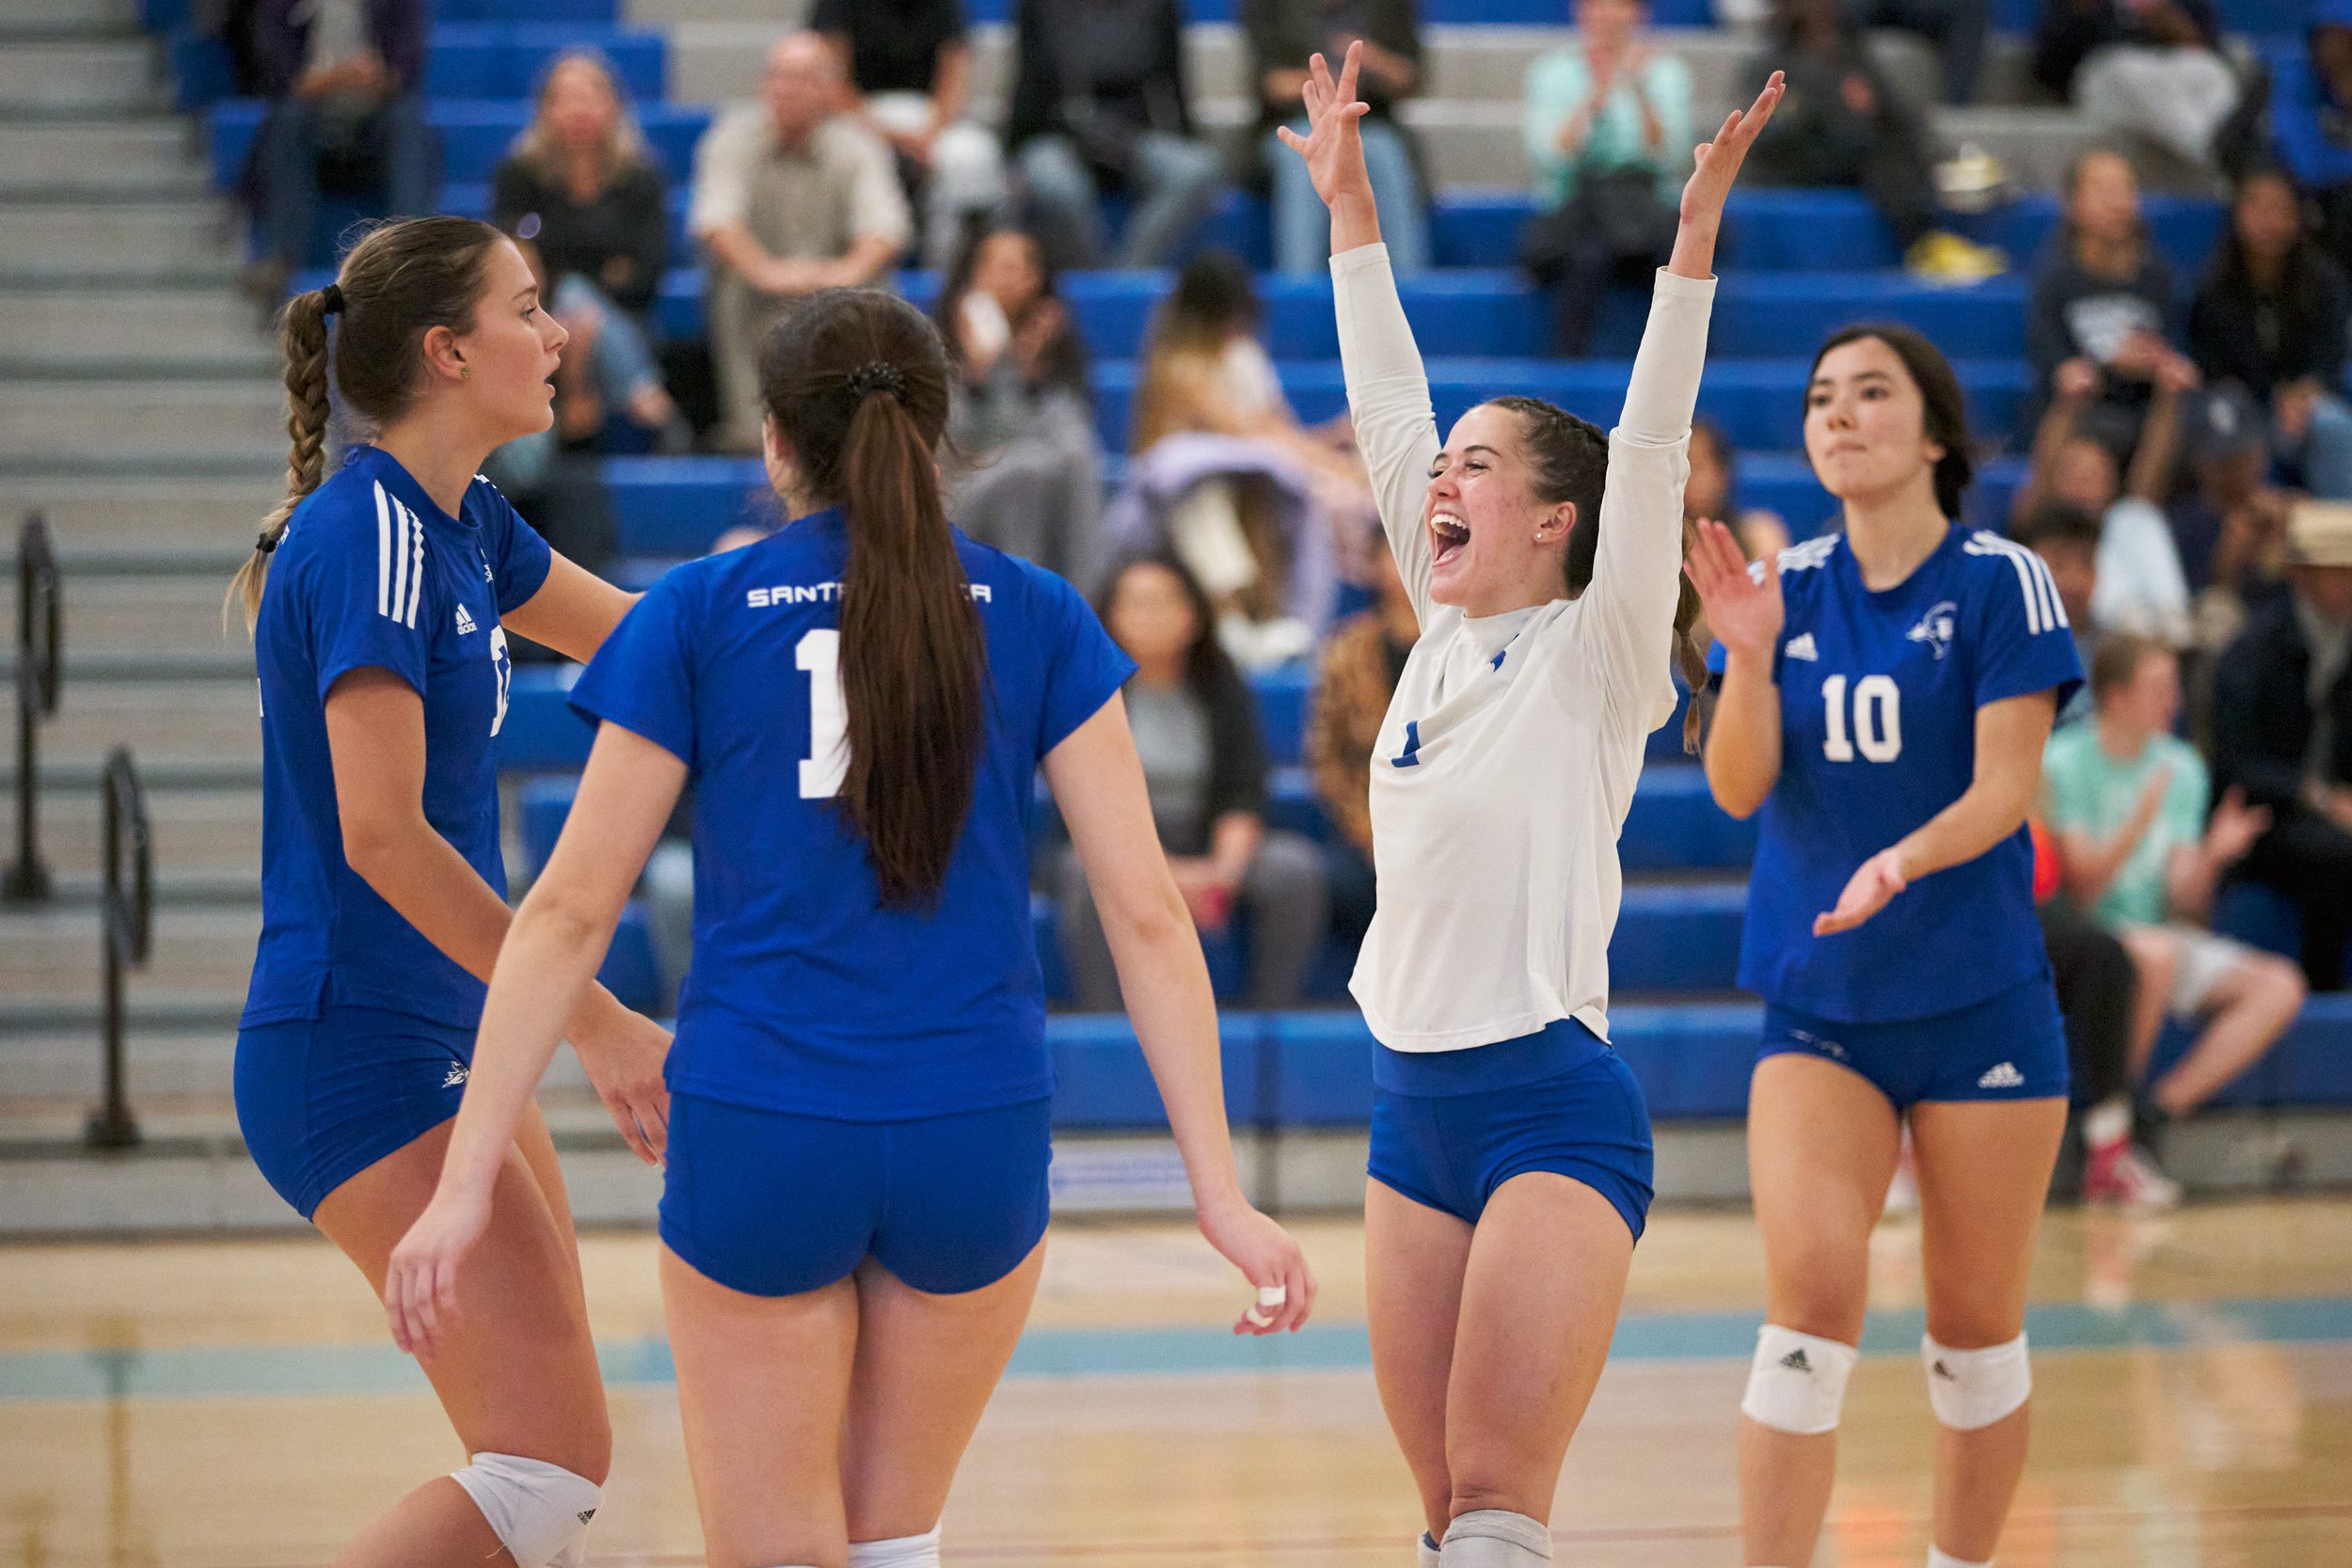  Santa Monica College Corsairs' Mia Paulson, Maiella Riva, Halle Anderson, and Sophia Odle during the women's volleyball match against the College of the Canyons Cougars on Friday, Oct. 28, 2022, at SMC Gym in Santa Monica, Calif. The Corsairs lost 1